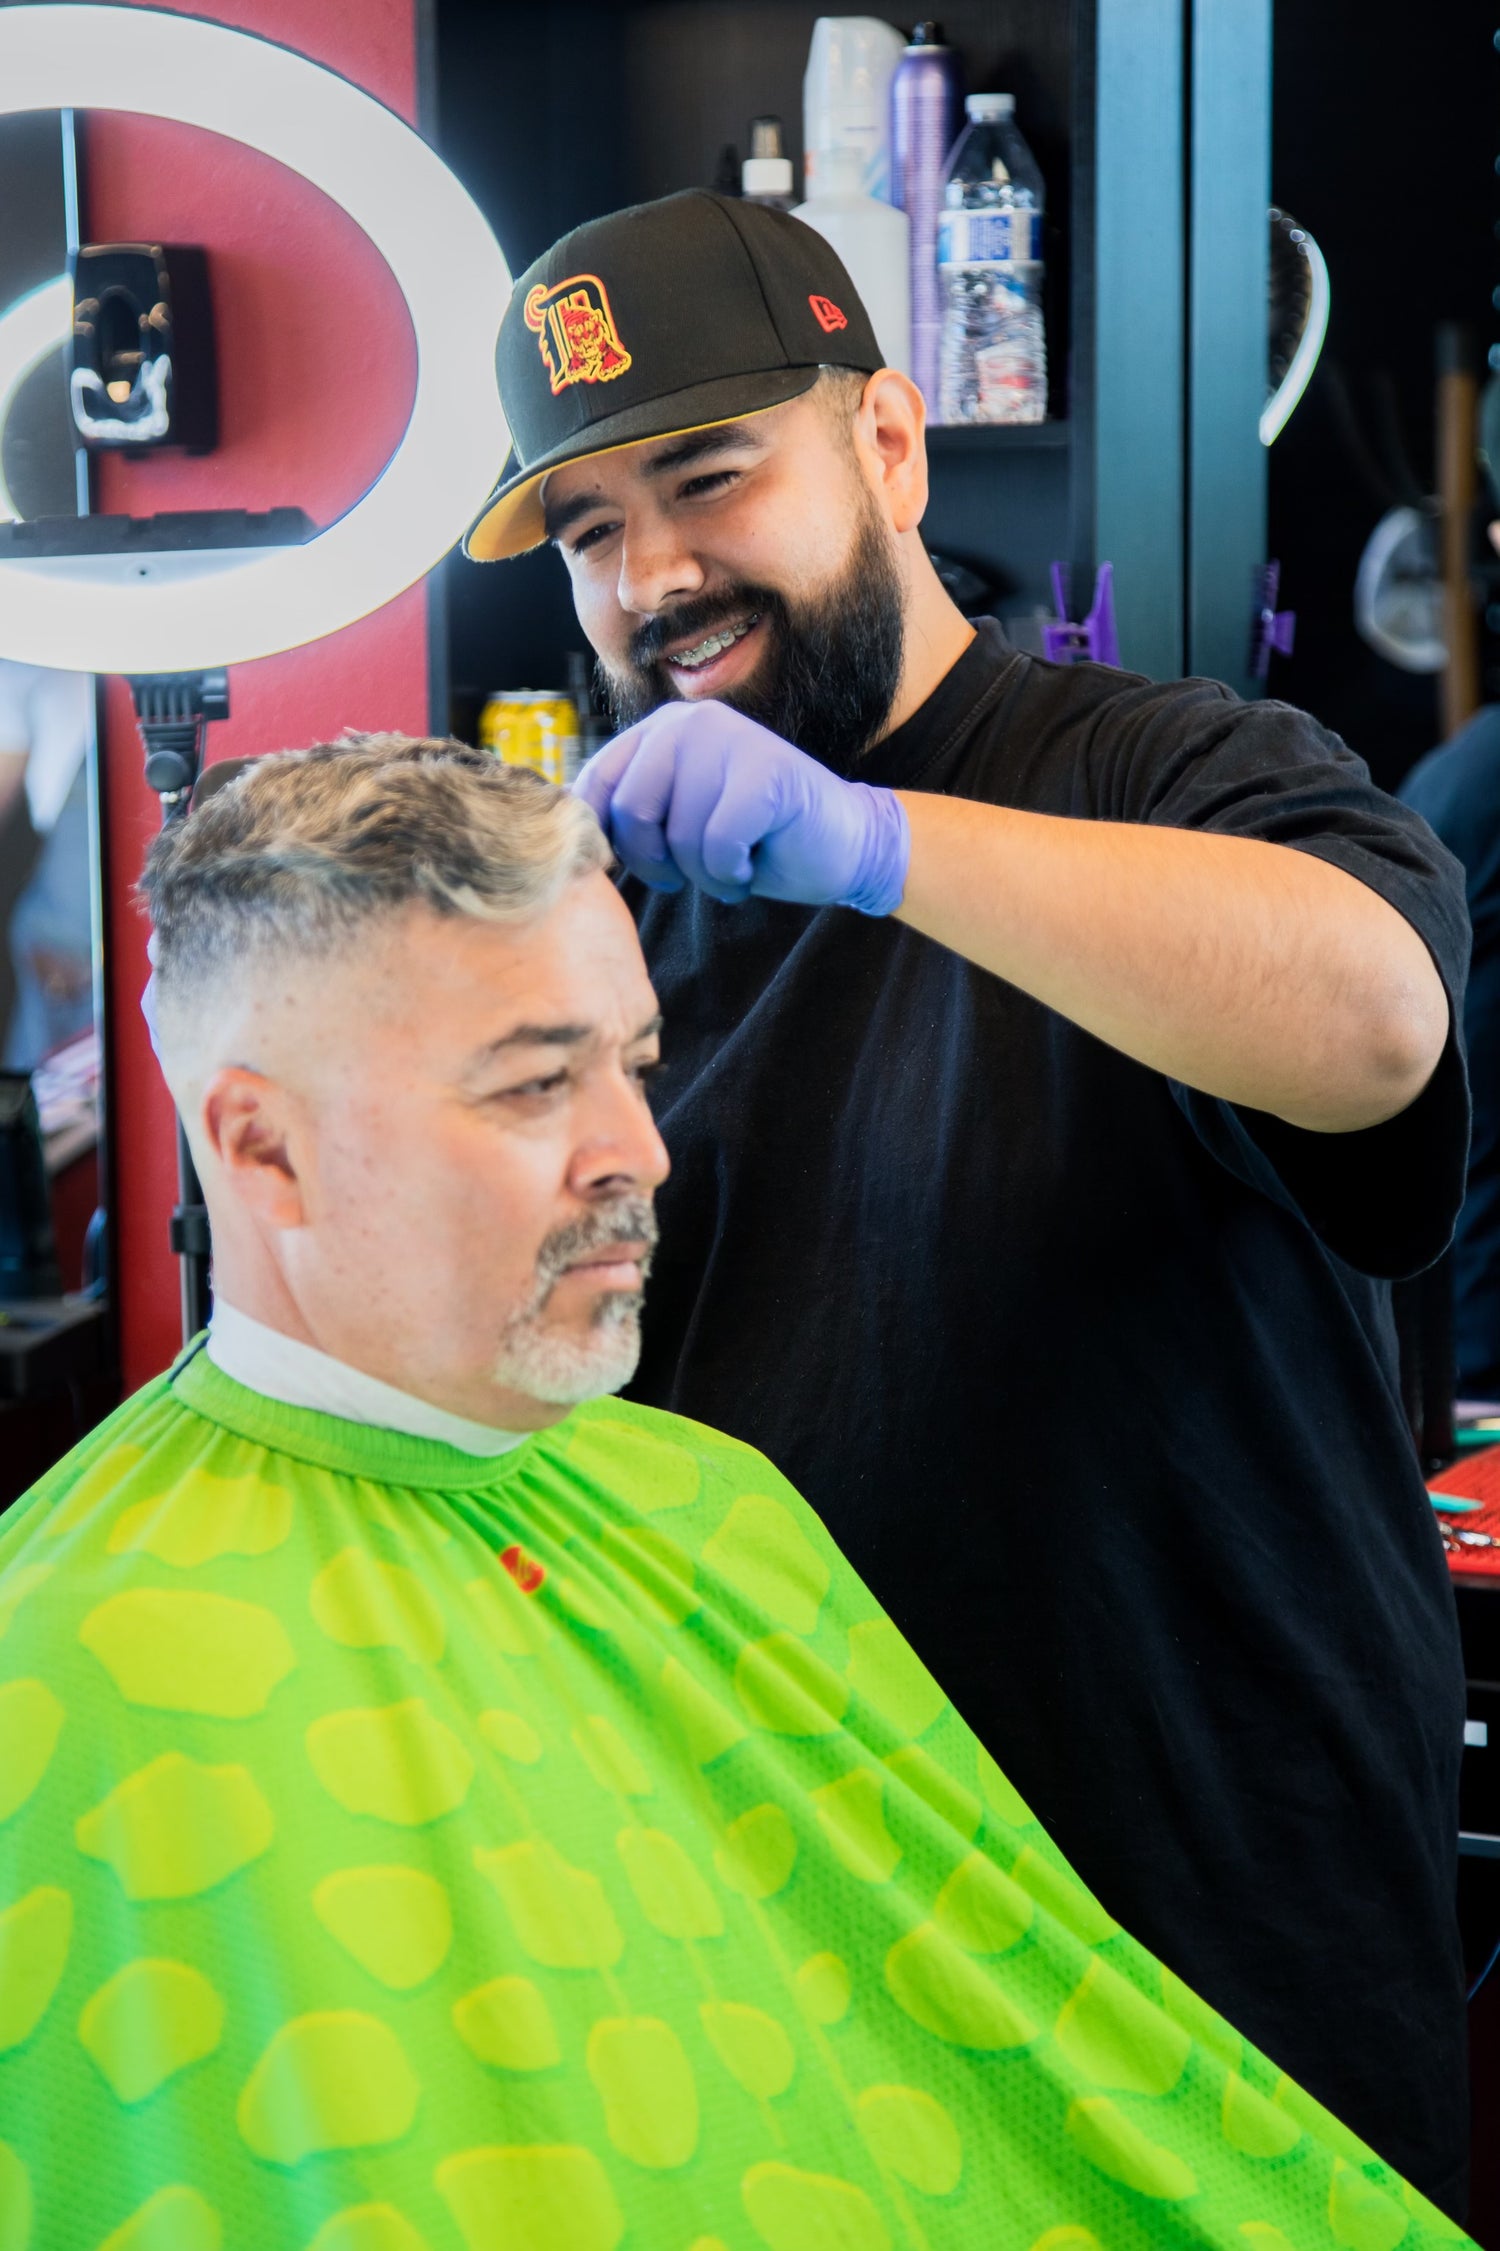 Barber with a black hat and shirt giving a client with a green apron a haircut